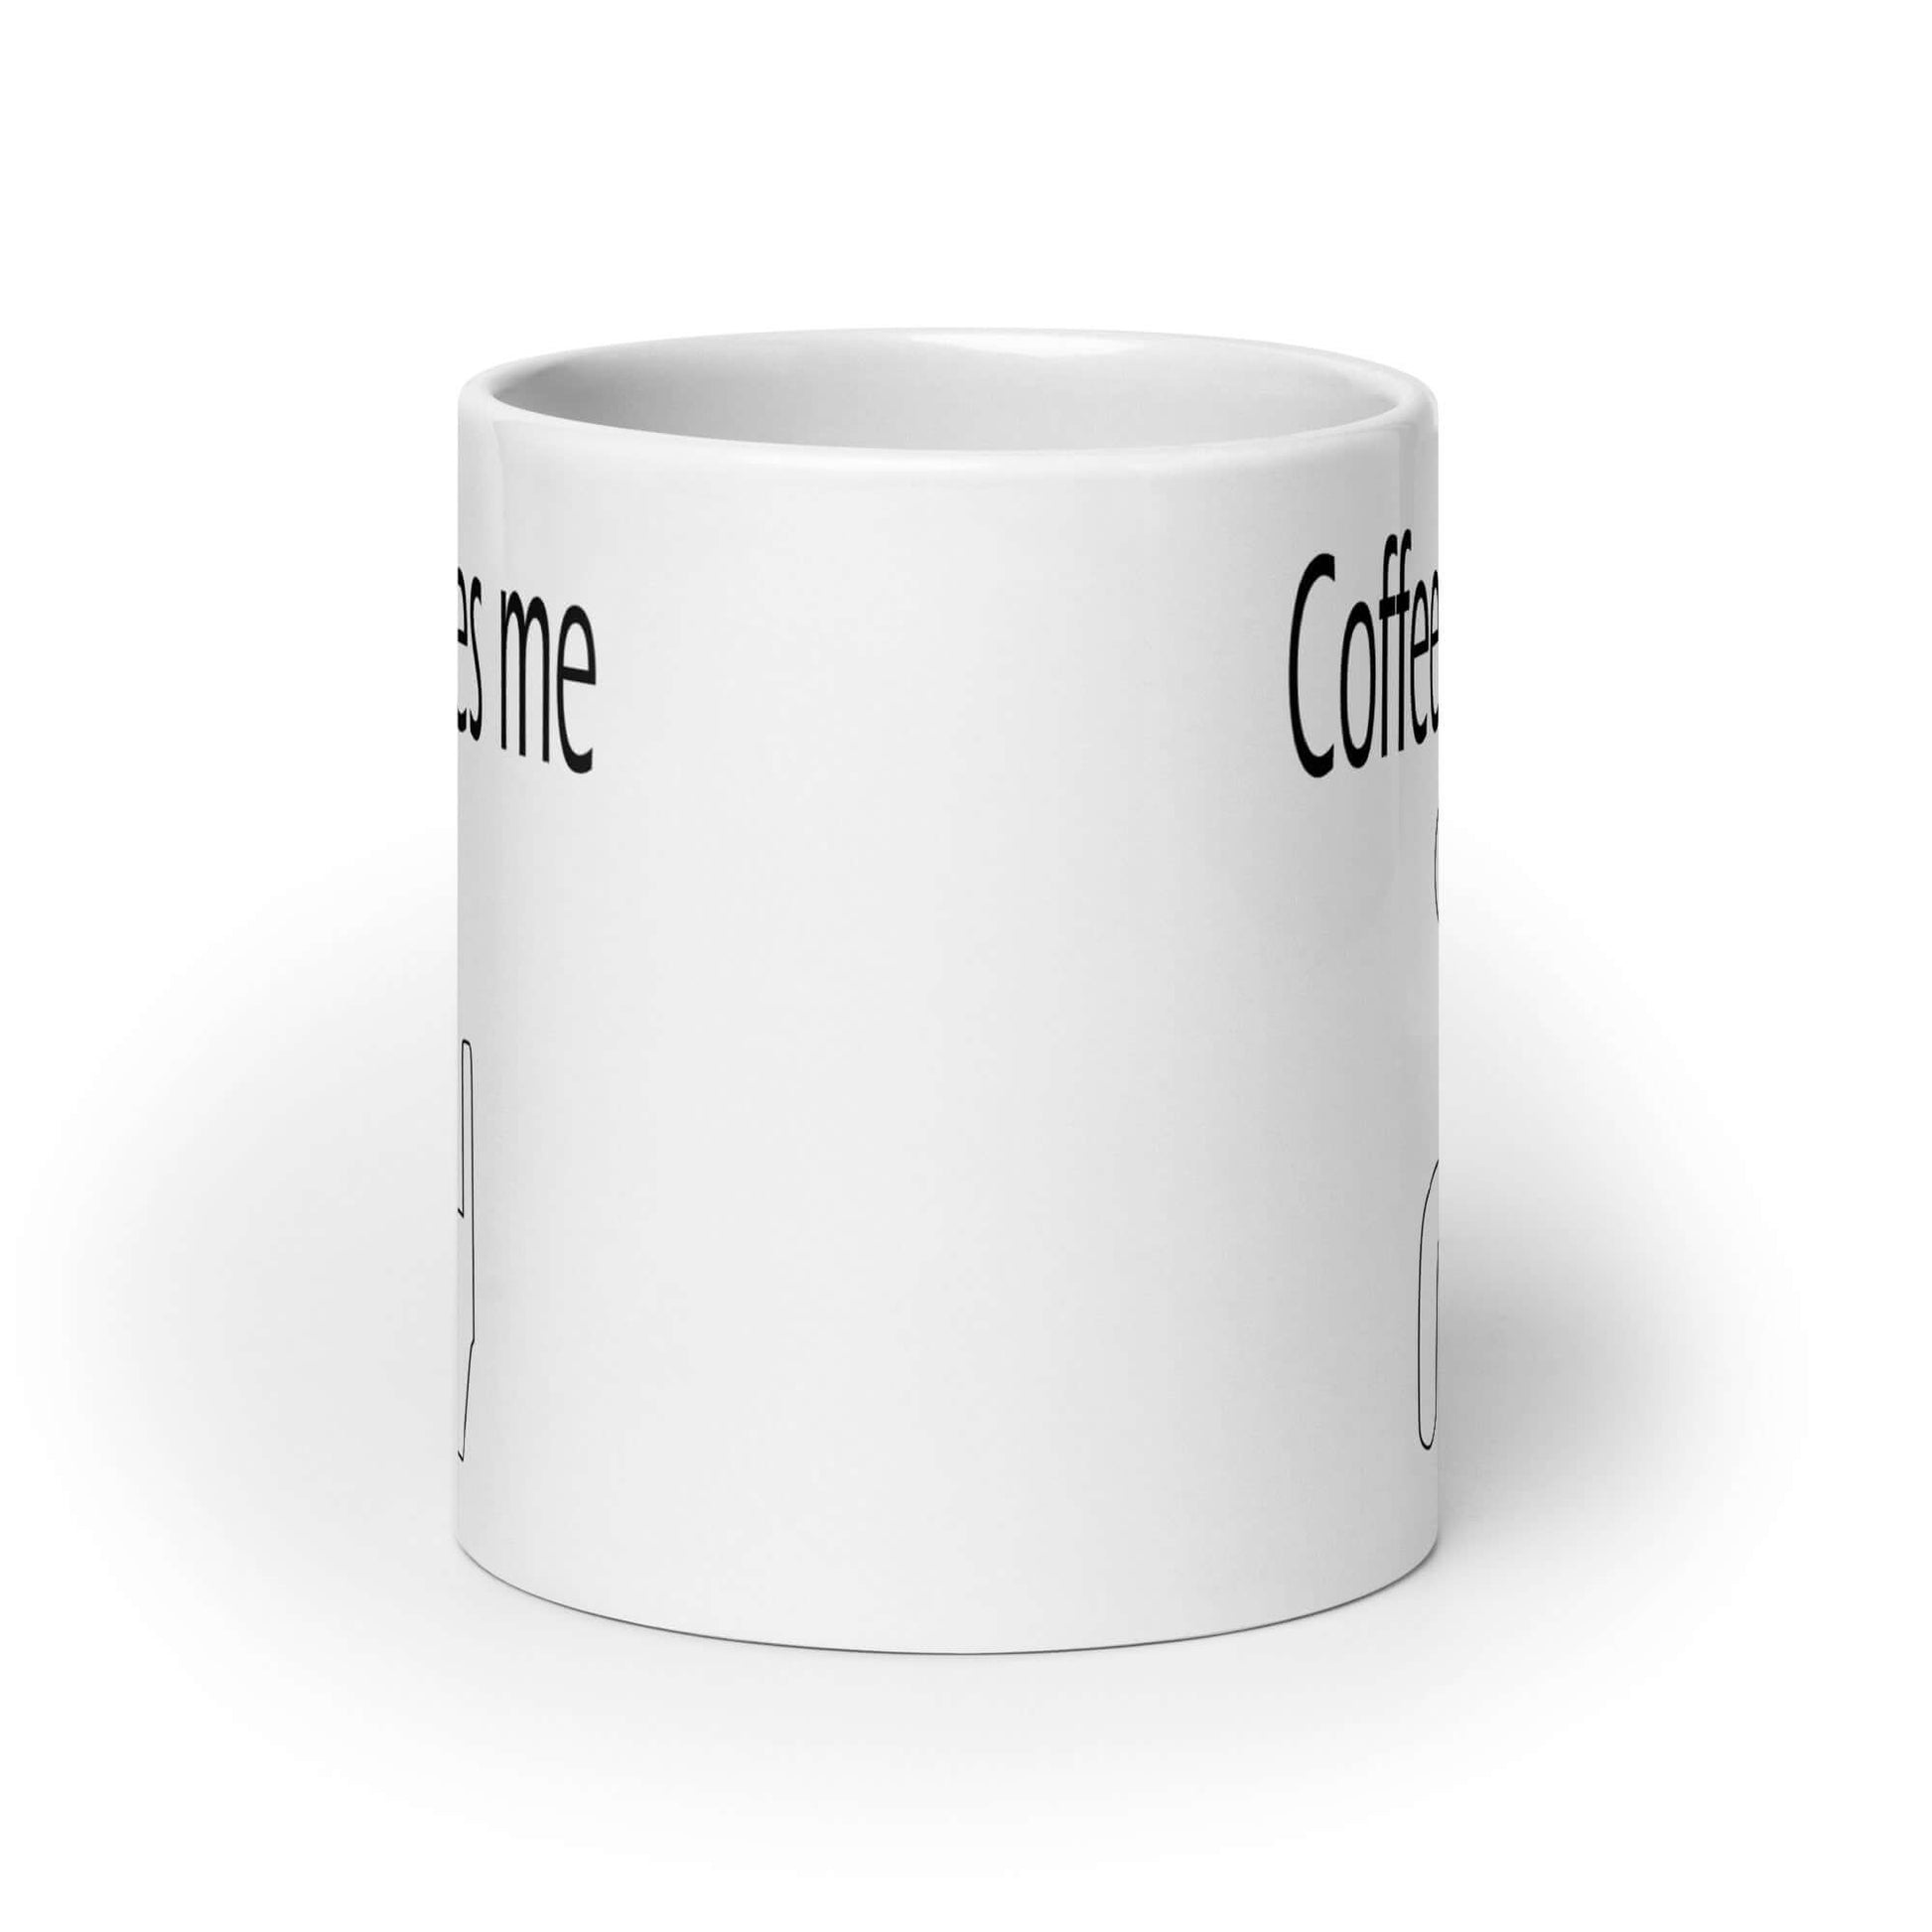 White ceramic coffee mug with the words Coffee makes me and a line drawing of a toilet. The graphics are printed on both sides of the mug.